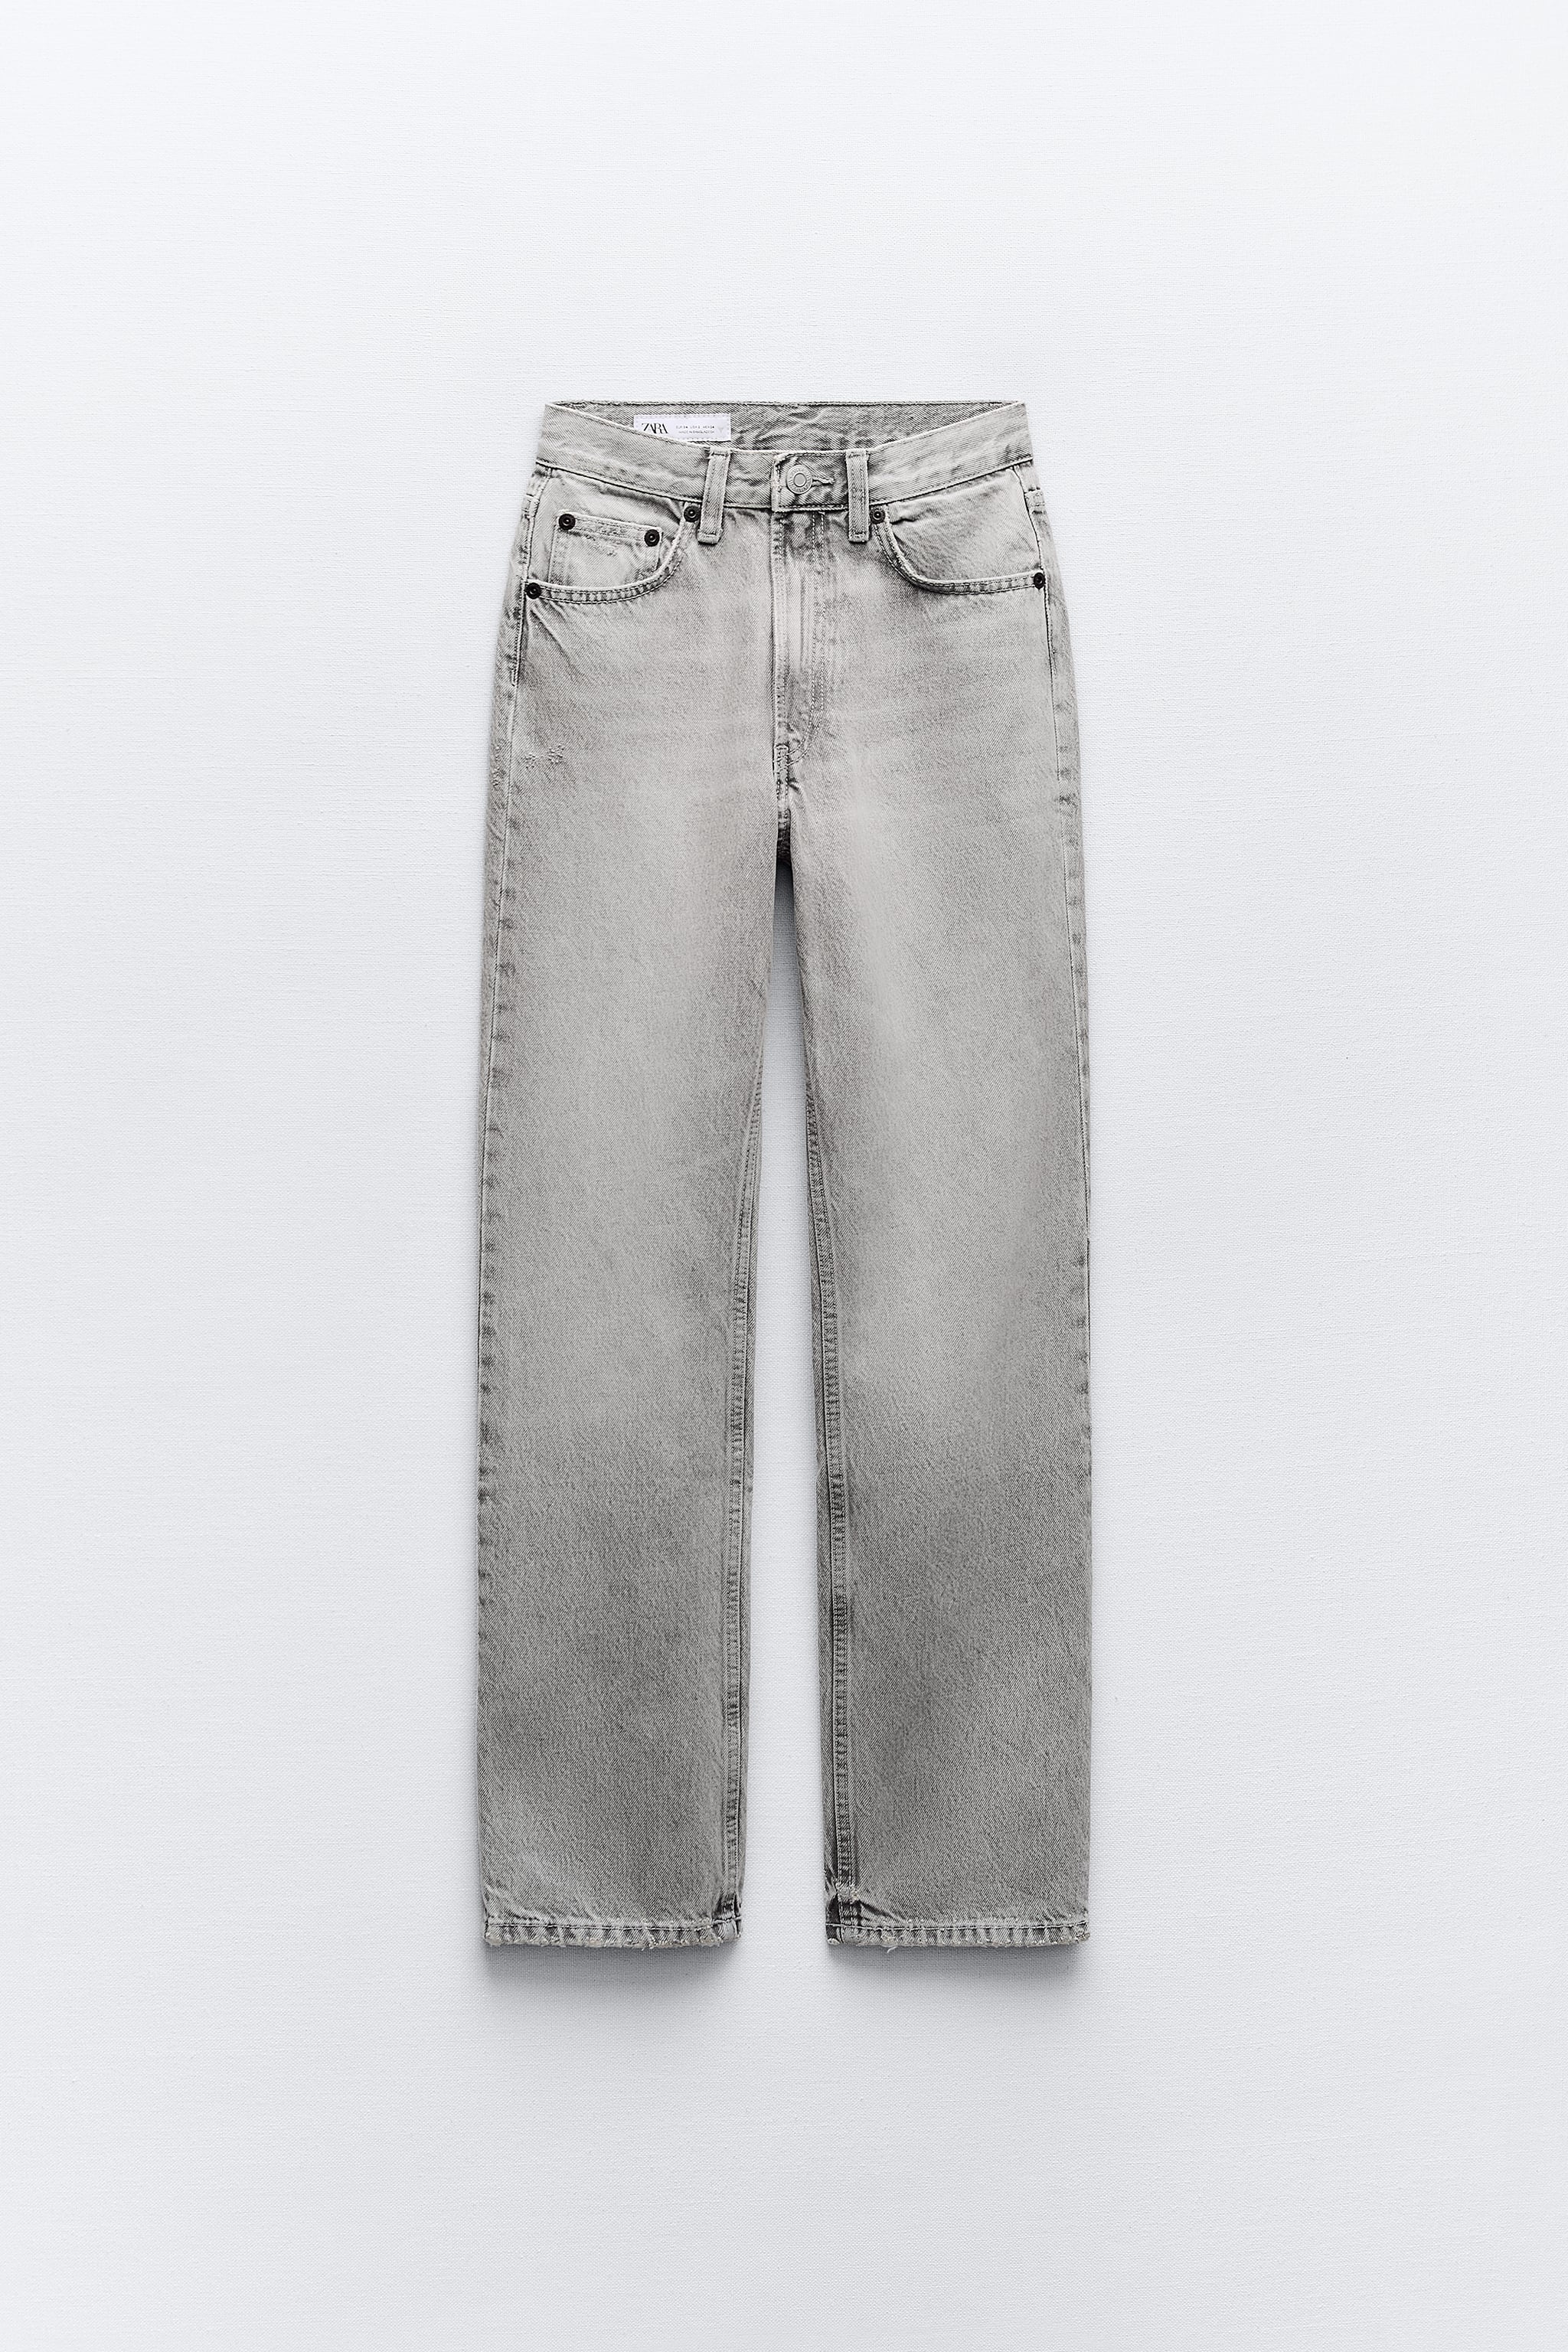 TRF STRAIGHT LEG JEANS WITH A HIGH WAIST